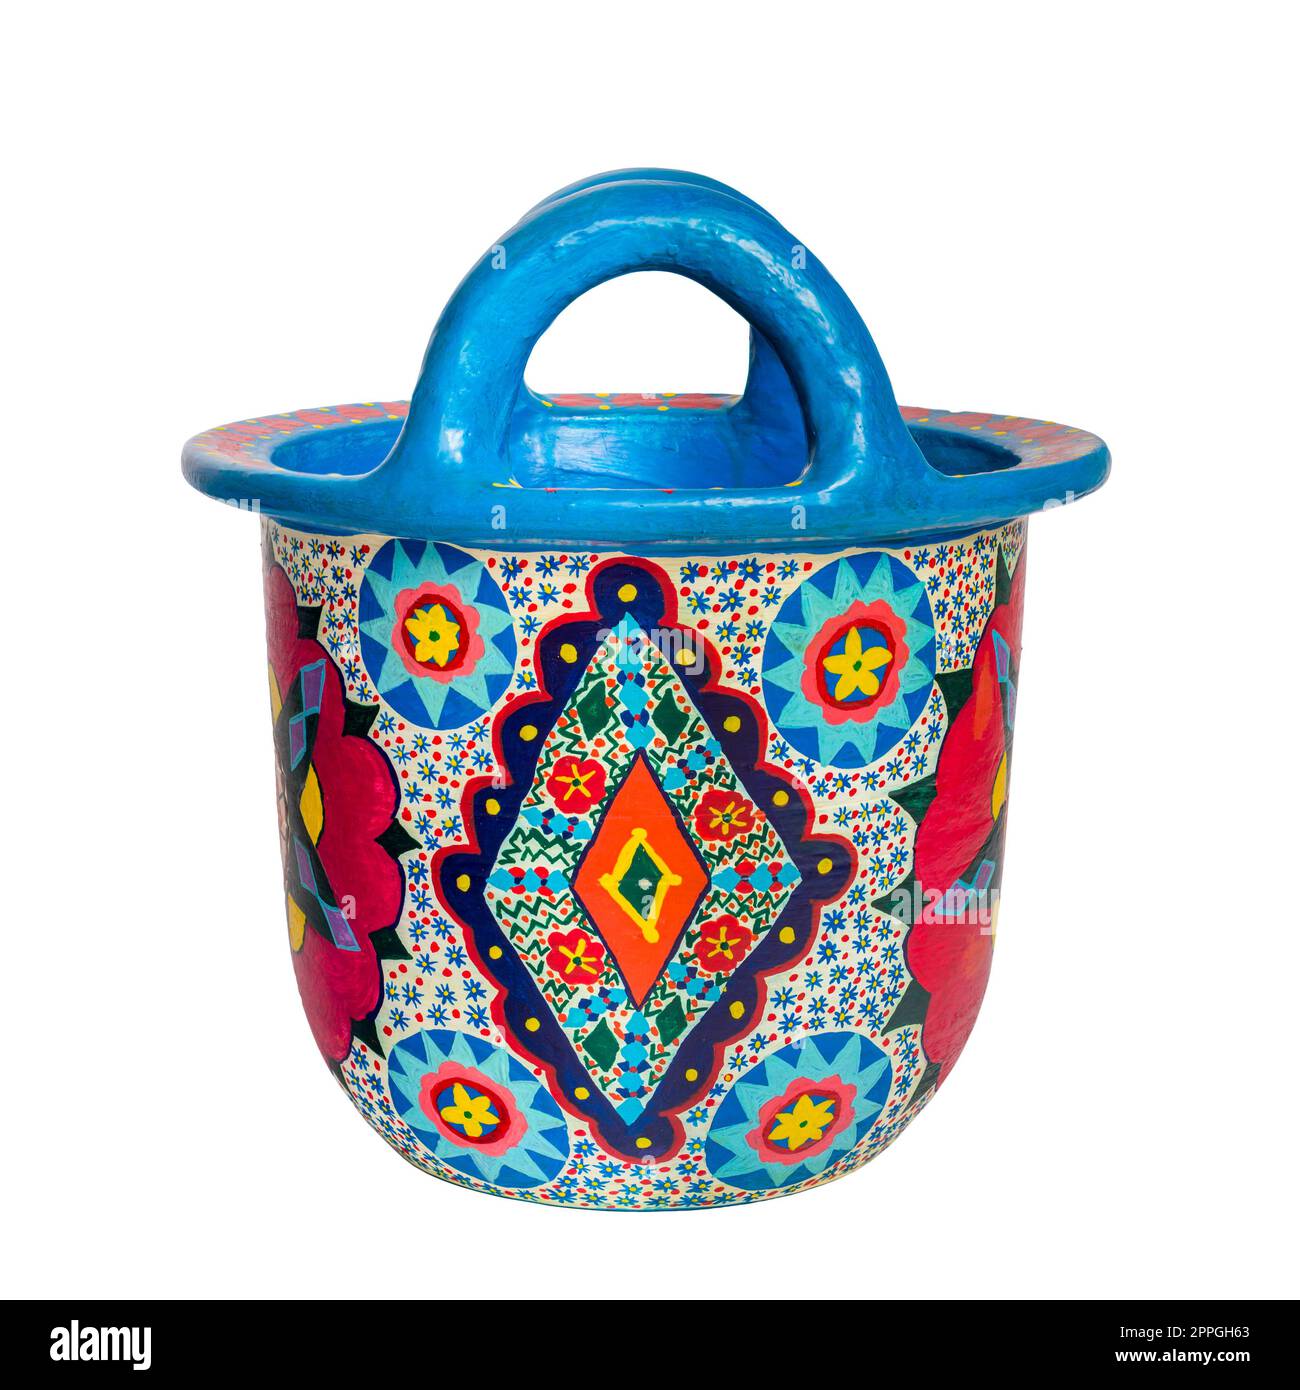 Handmade artistic pained colorful decorated pottery basket with two handles with clipping path Stock Photo